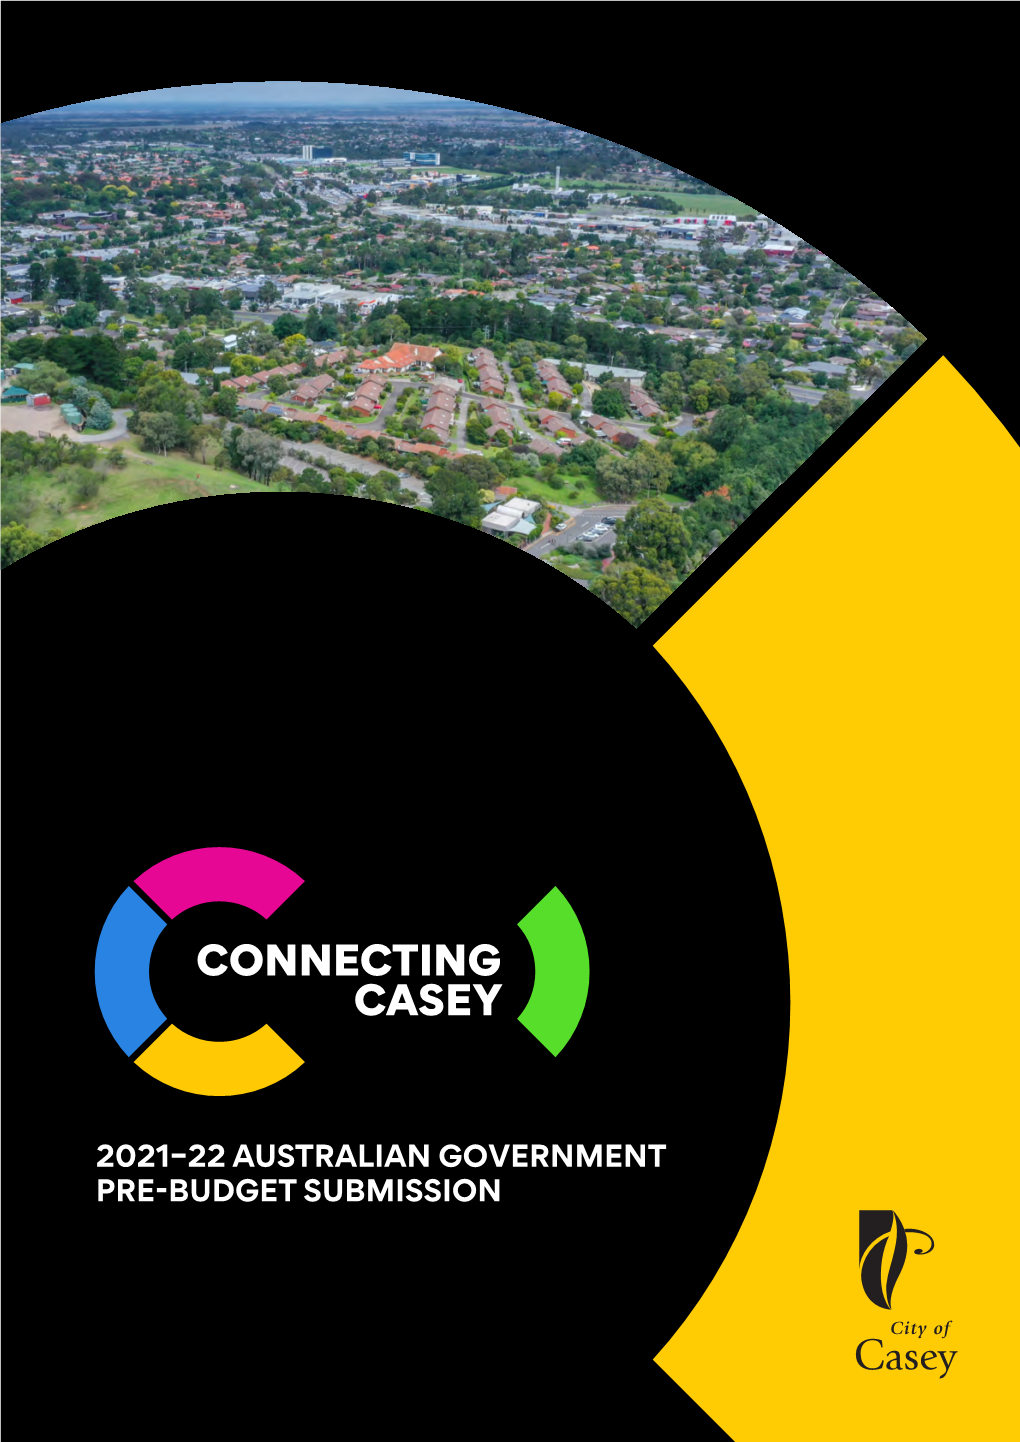 City of Casey Is One of Australia’S Fastest Growing Municipalities